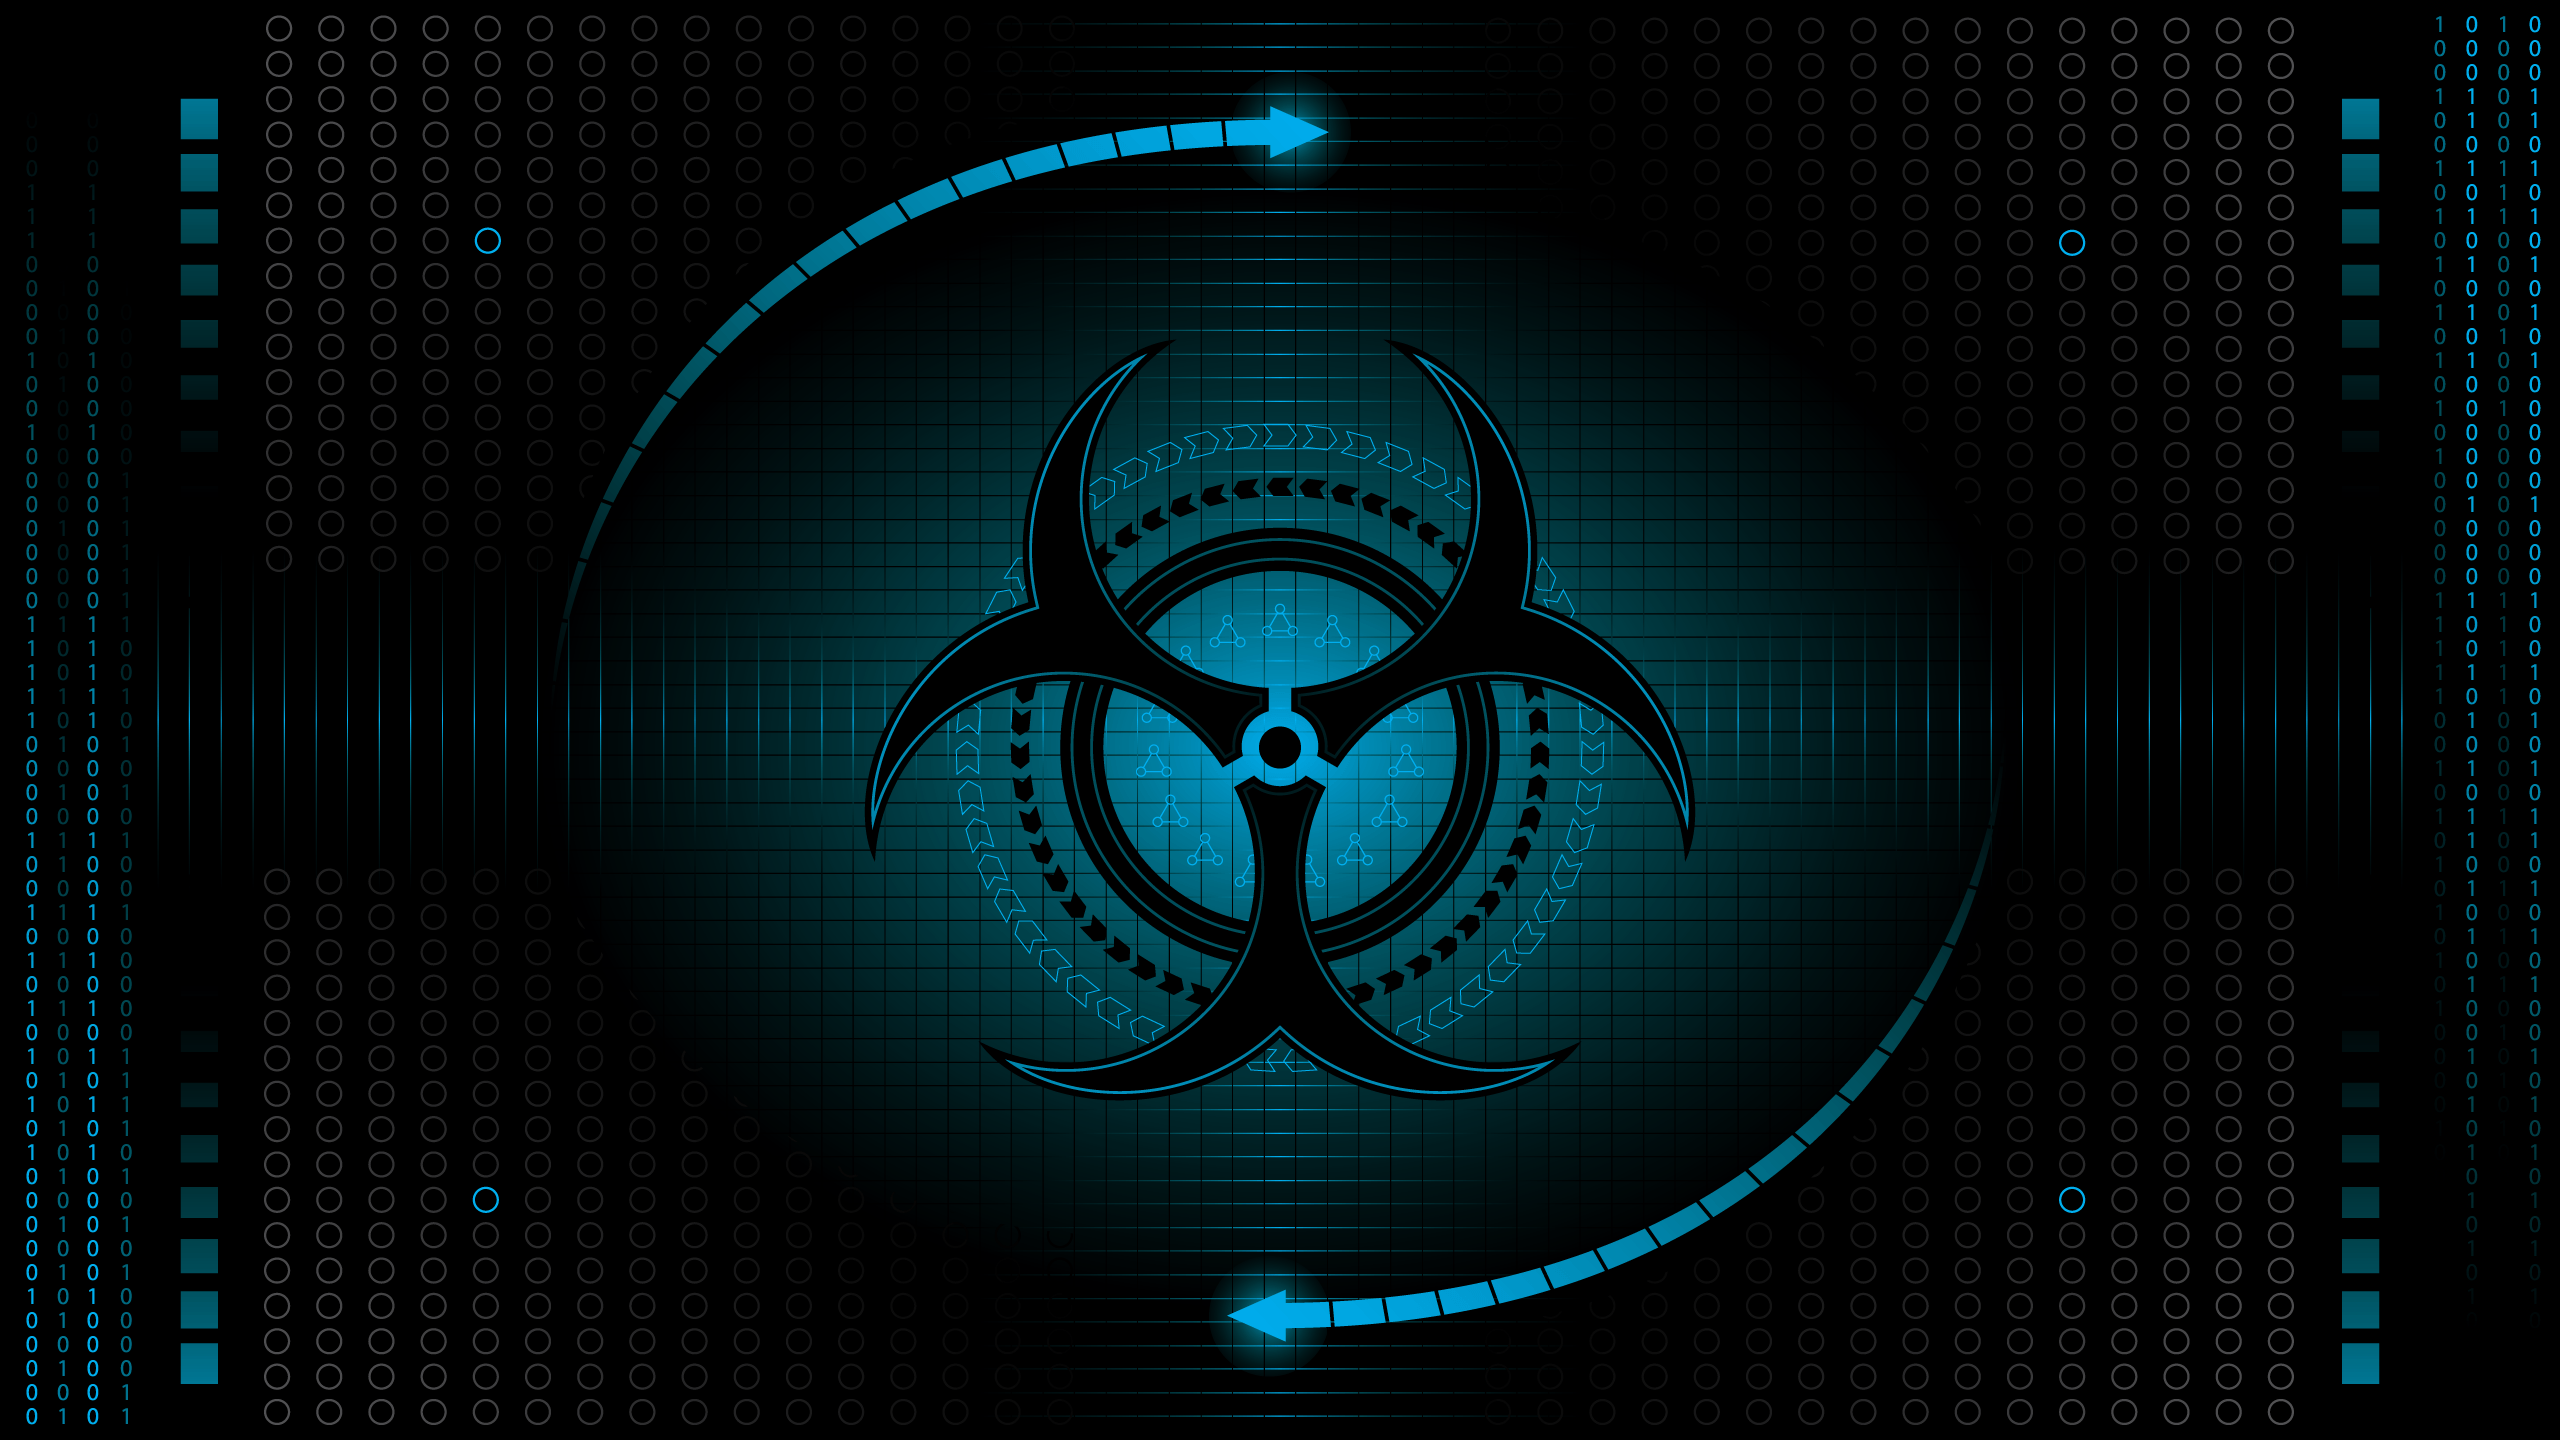 Biohazard HD Wallpaper and Background Image